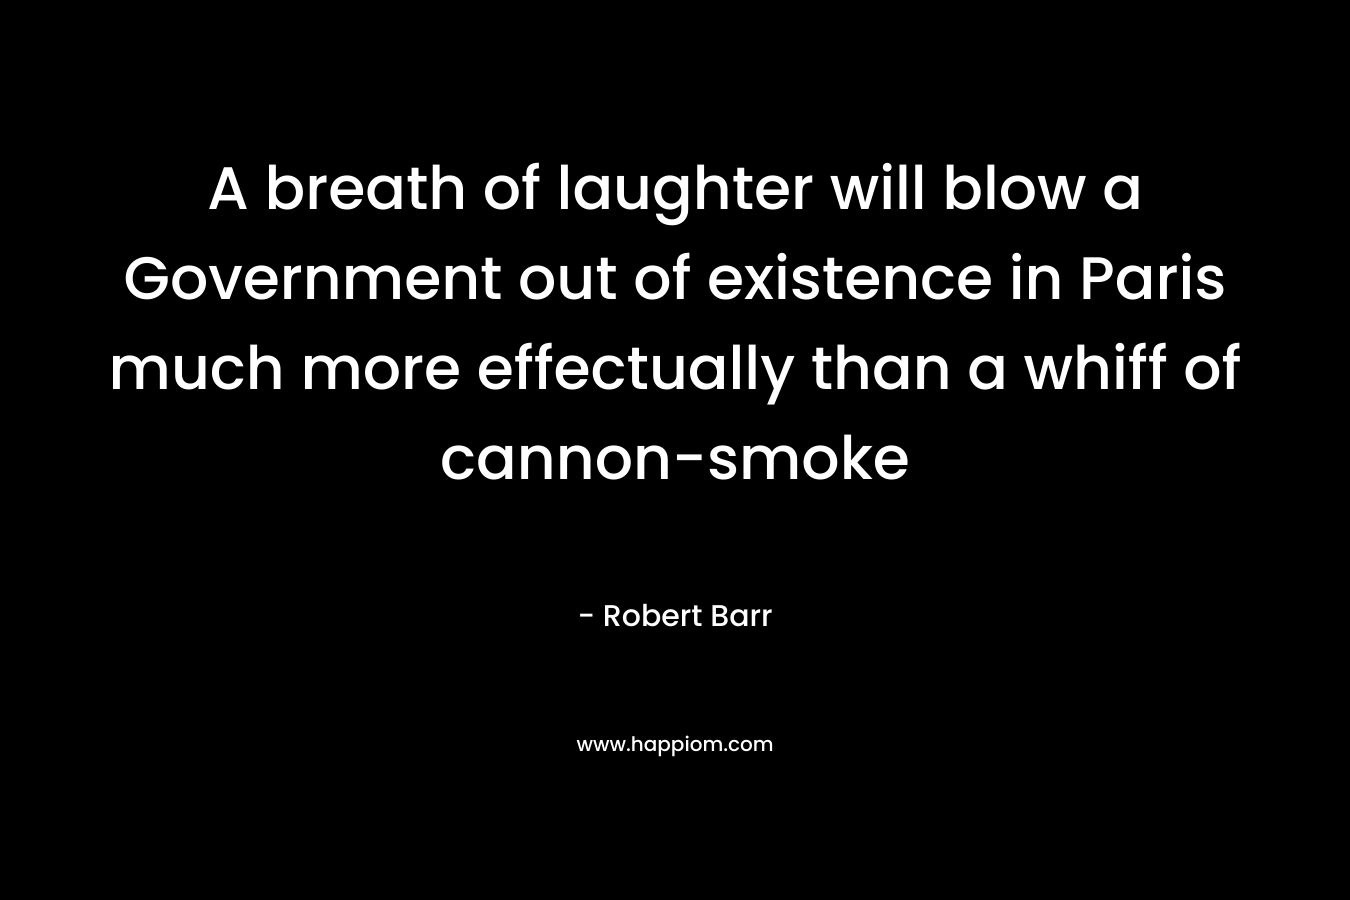 A breath of laughter will blow a Government out of existence in Paris much more effectually than a whiff of cannon-smoke